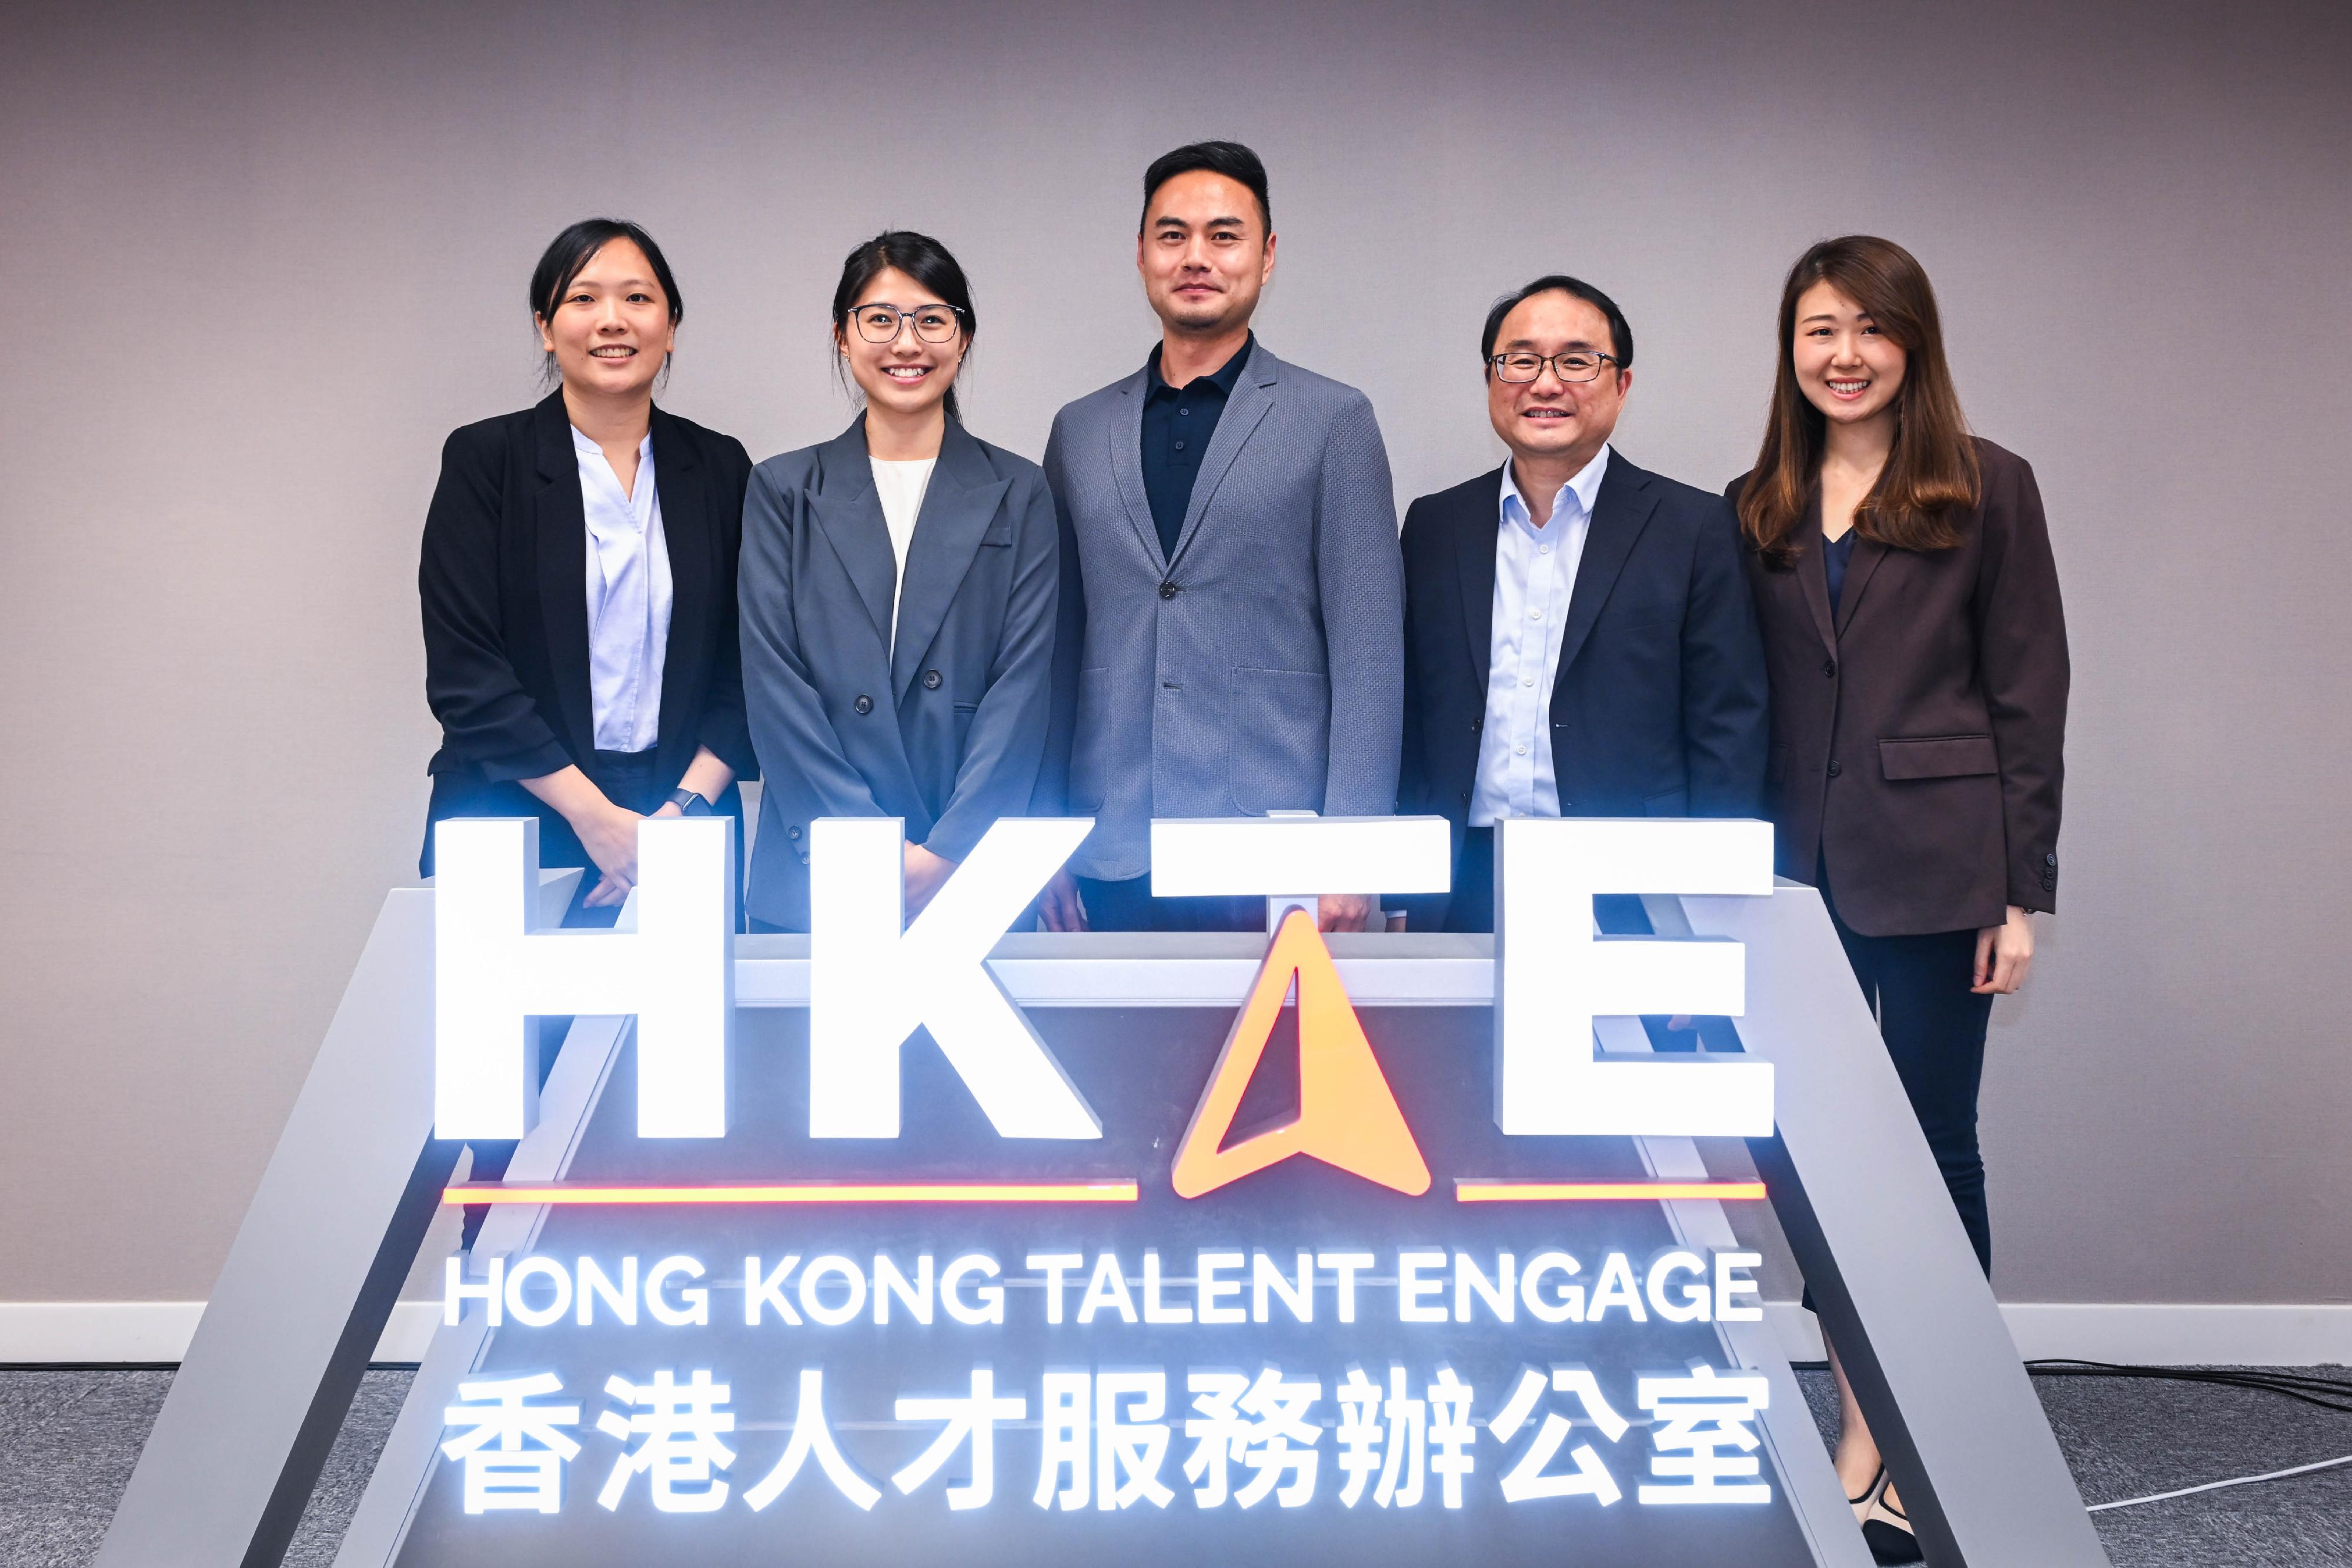 Hong Kong Talent Engage today (June 27) hosted a themed seminar to brief incoming talent on corruption prevention and anti-deception practices to raise their awareness of the relevant crimes. Photo shows the speakers.